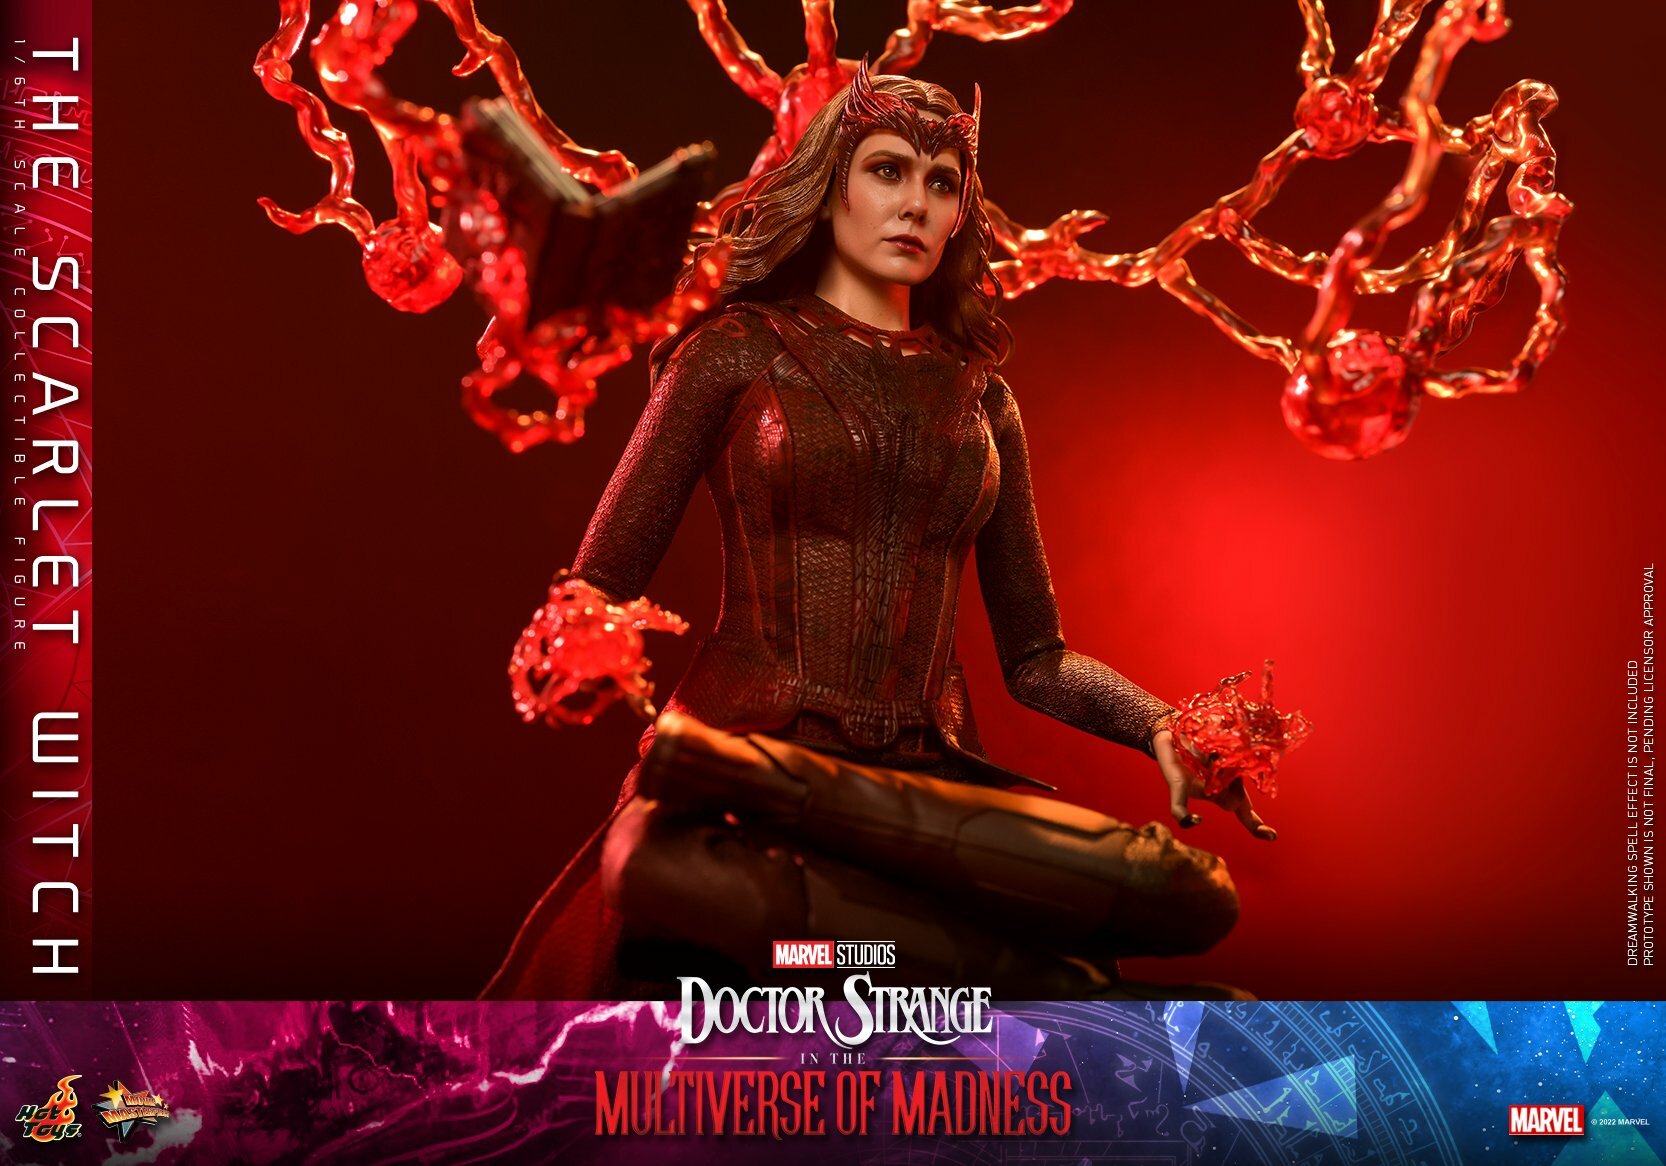 Hot-Toy-Multiverse-of-Madness-Scarlet-Witch-013.jpg.9b5229b438619d4d28c363e5f40cacba.jpg